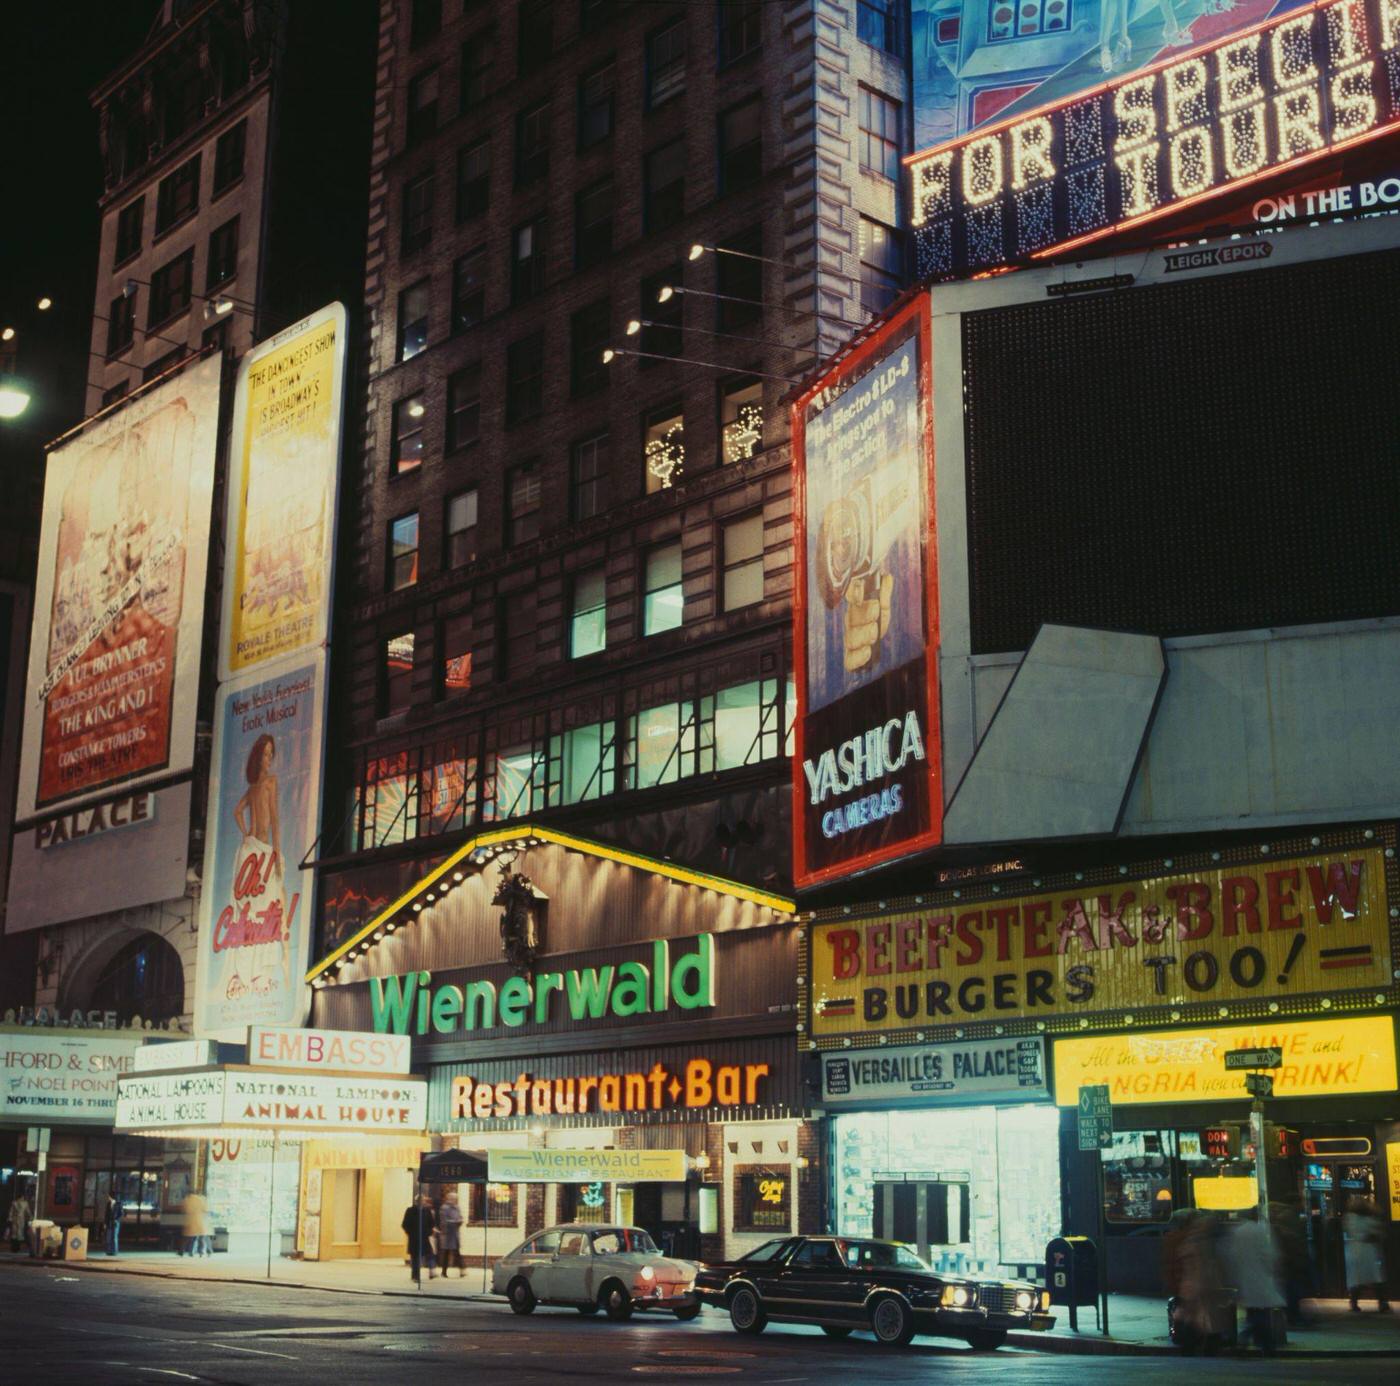 Palace Theatre And Nearby Attractions On Broadway, Manhattan, 1978